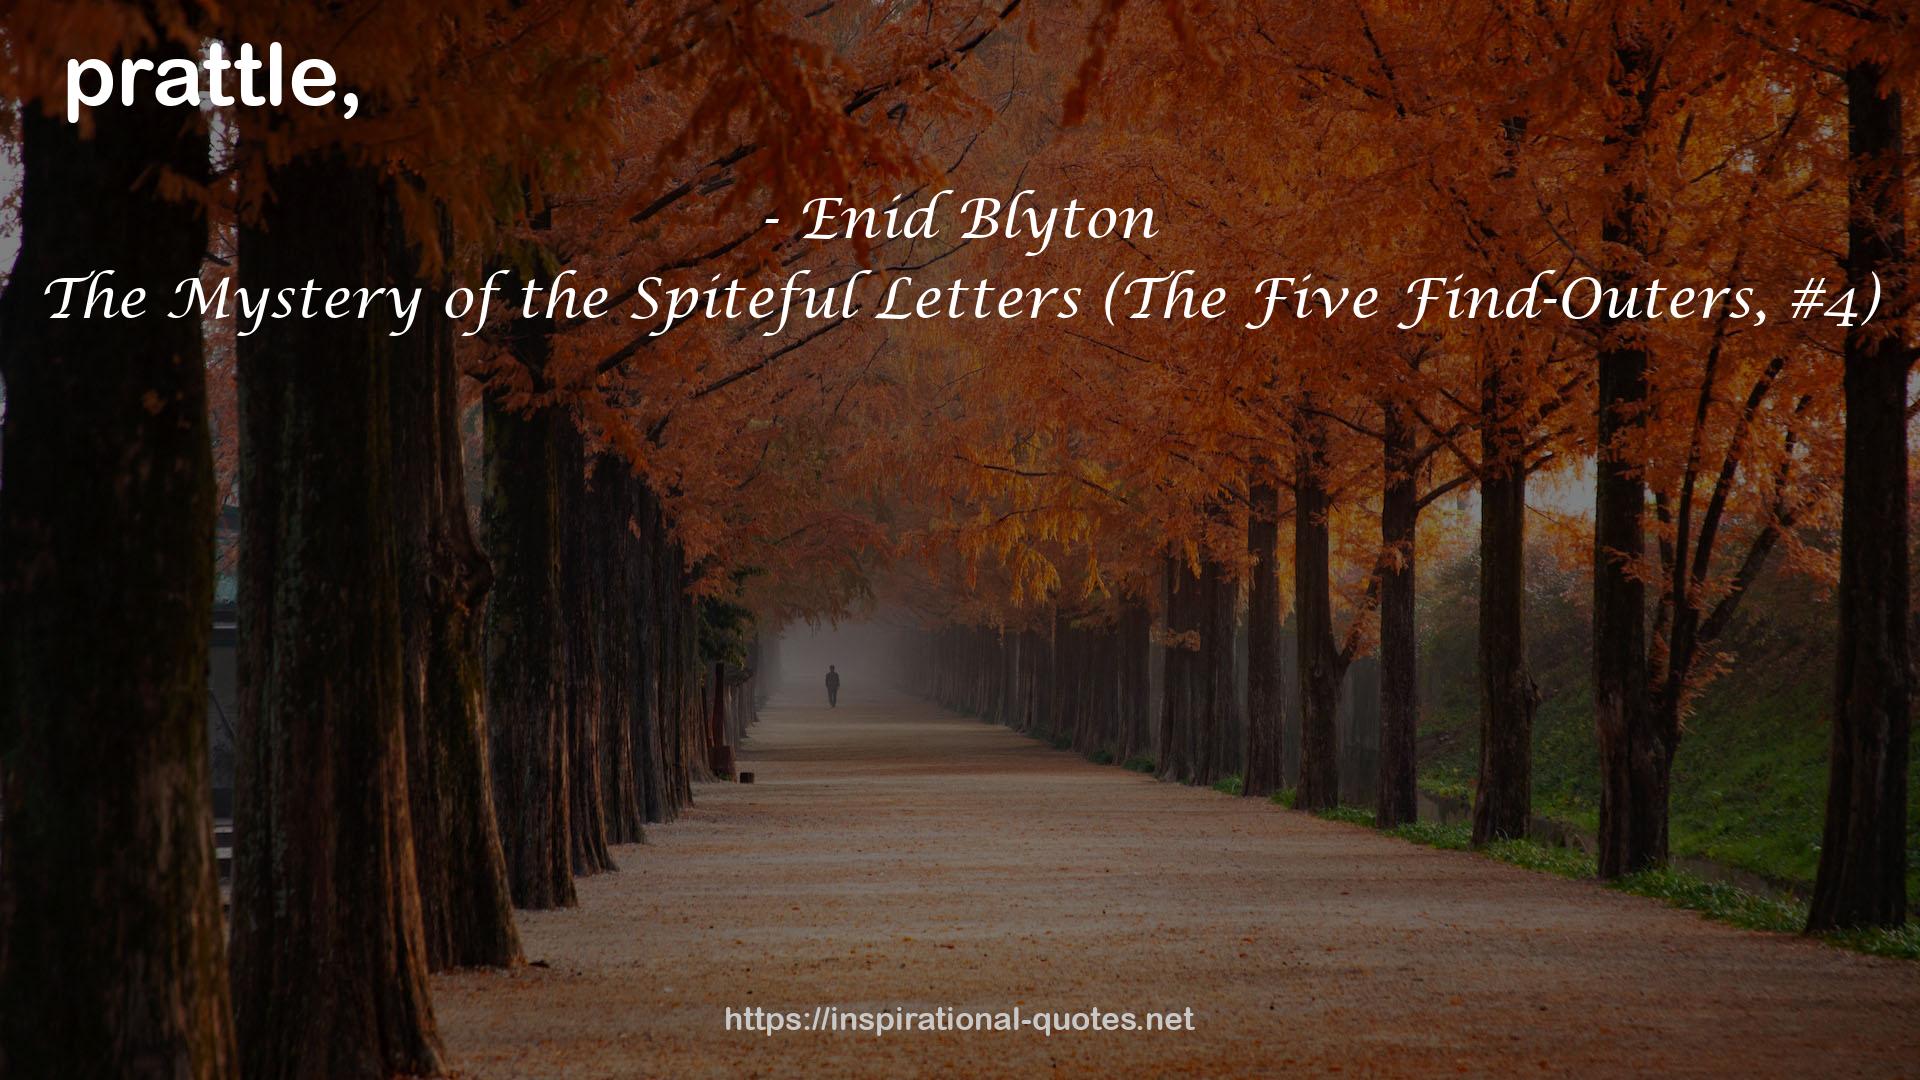 The Mystery of the Spiteful Letters (The Five Find-Outers, #4) QUOTES